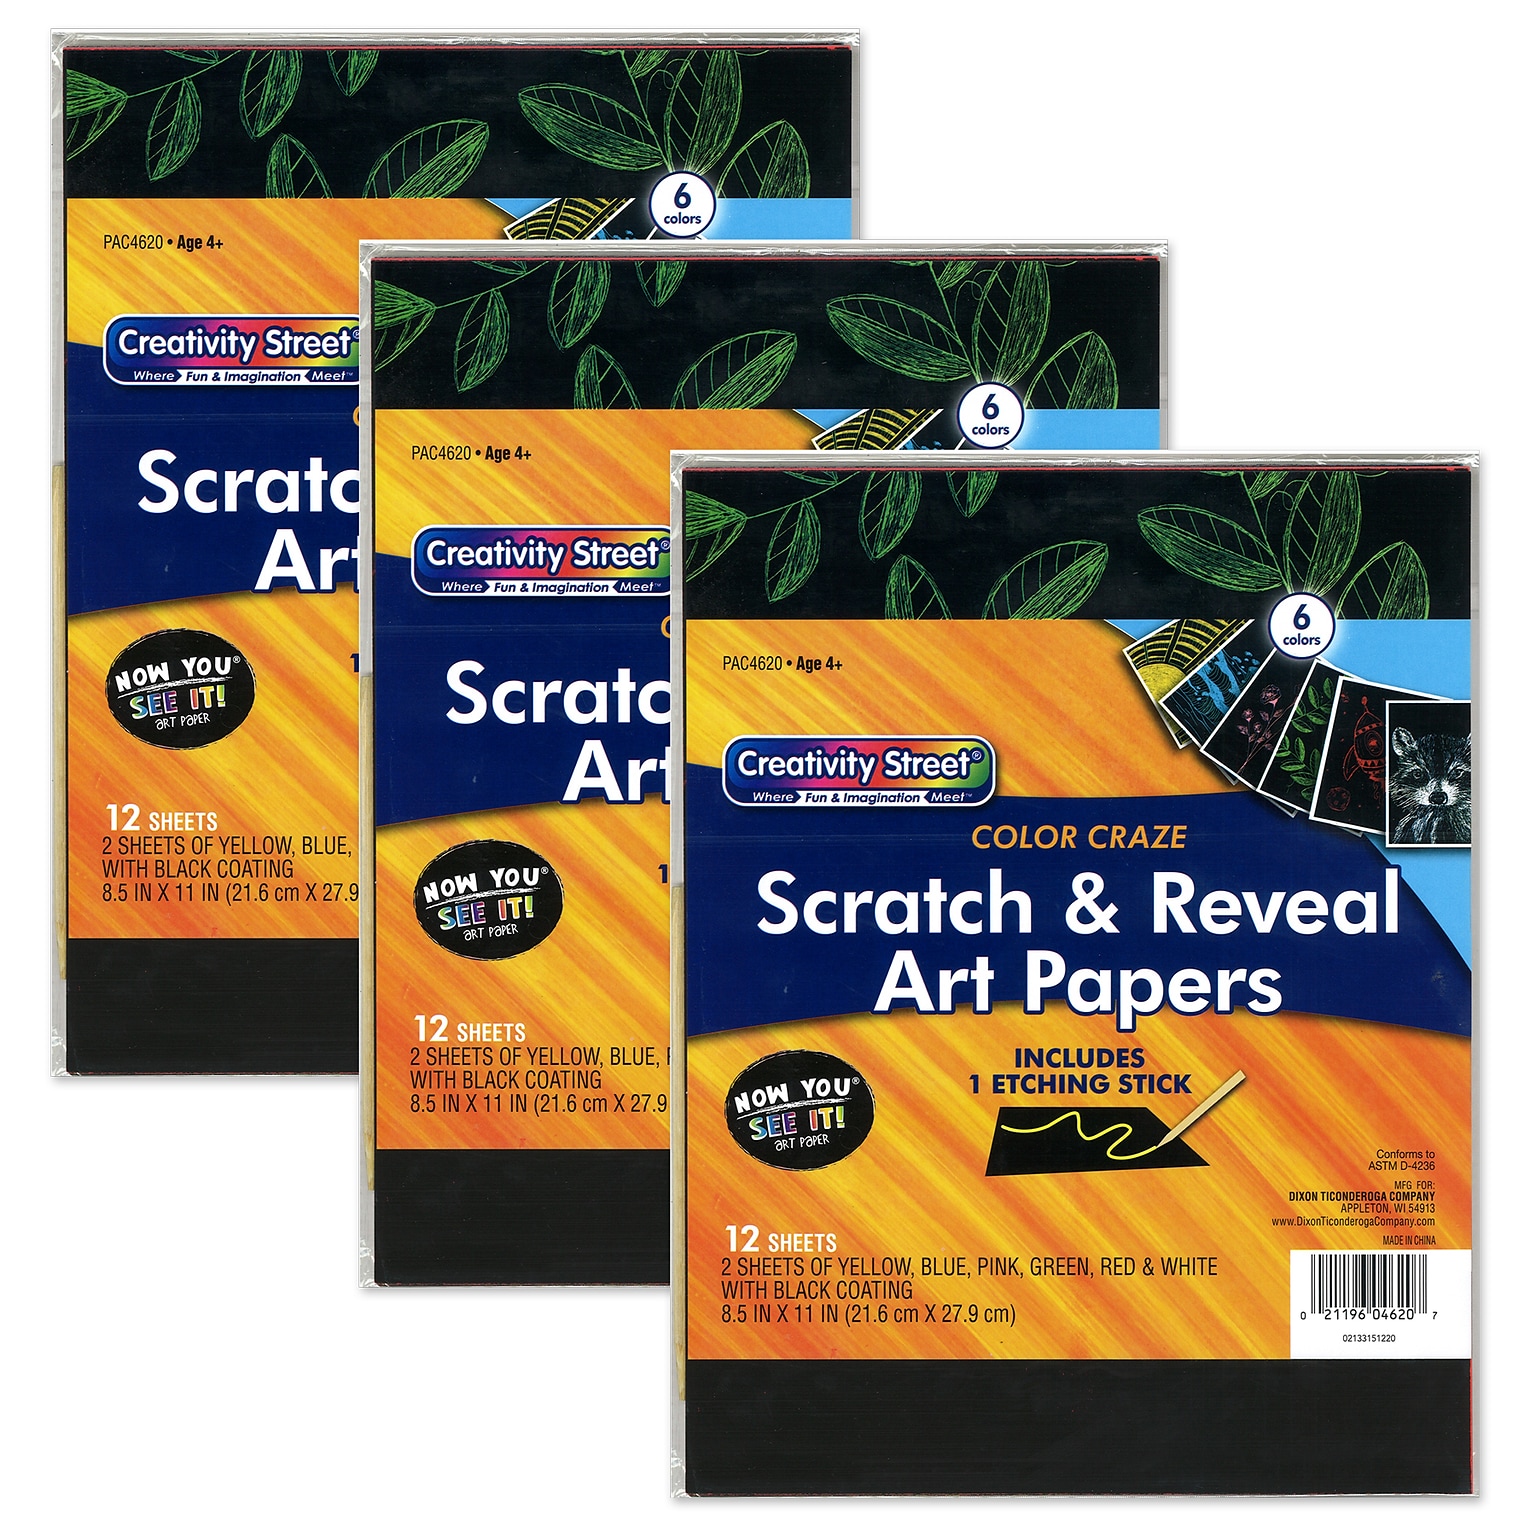 Now You See It!® Color Craze Scratch & Reveal Art Paper, 8.5 x 11, Assorted Colors, 12 Sheets Per Pack, 3 Packs (PACAC4620-3)